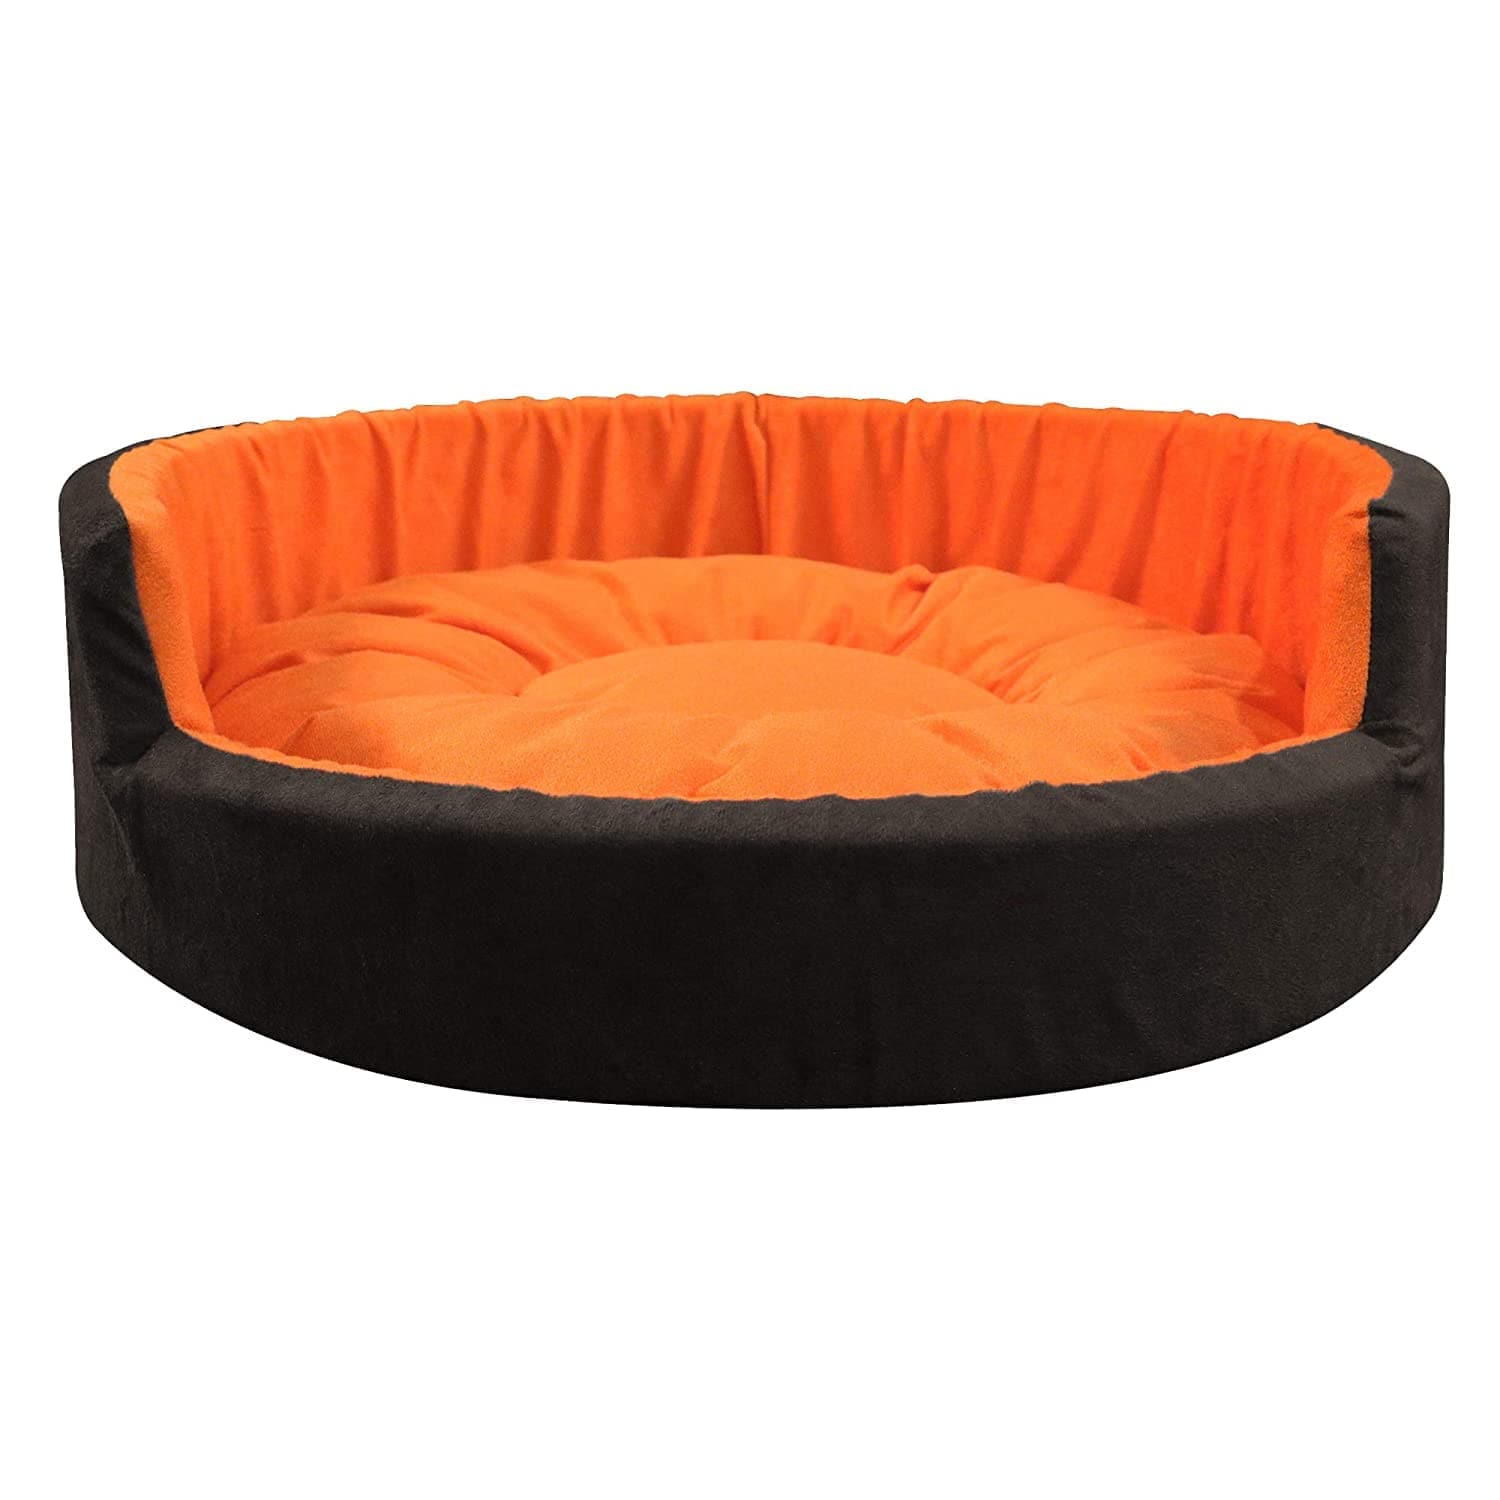 Hiputee Luxurious Round Velvet Bed for Dogs and Cats (Orange & Black)